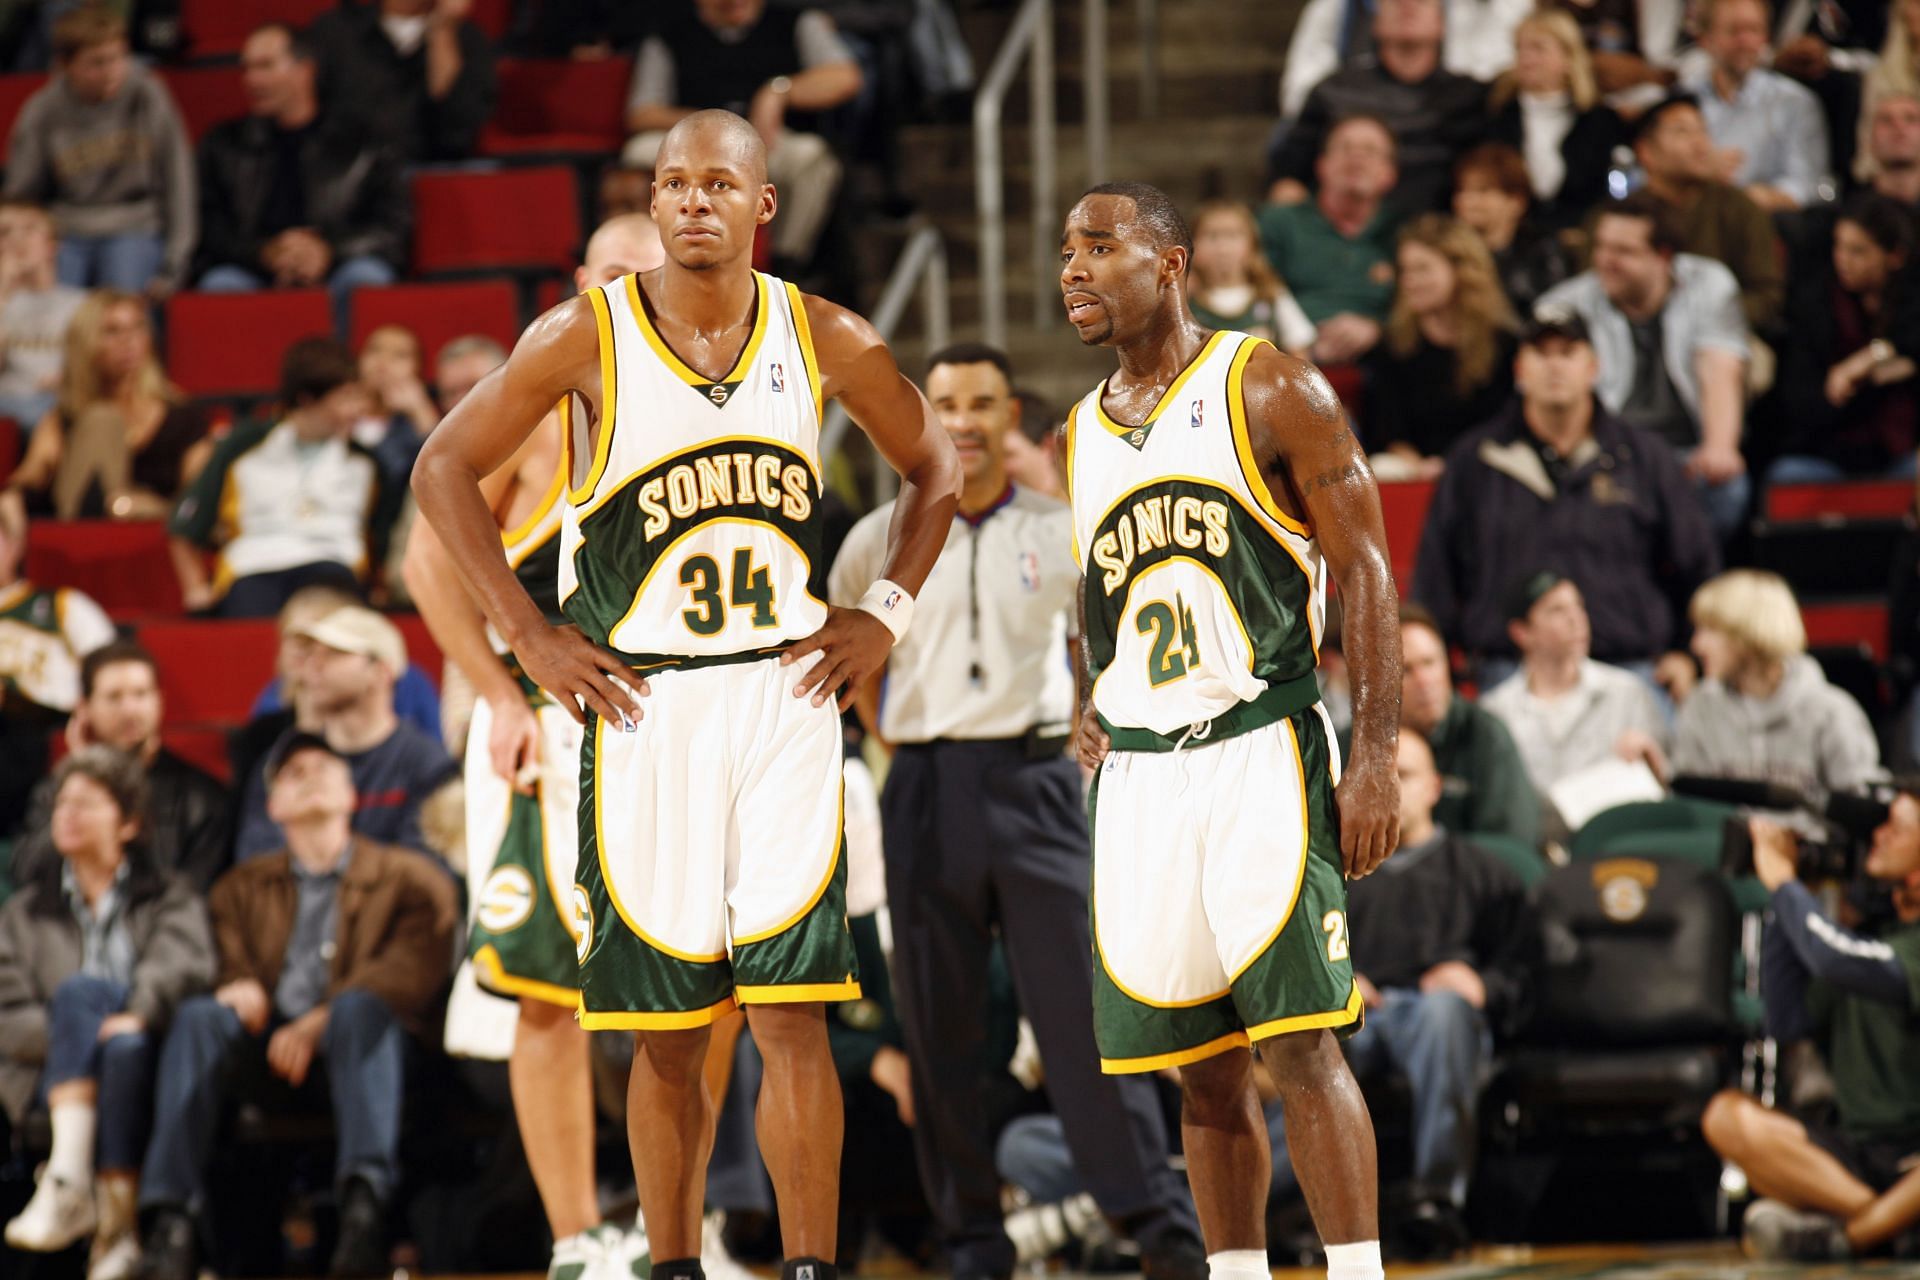 Several NBA teams, including the Sonics, moved due to financial problems.